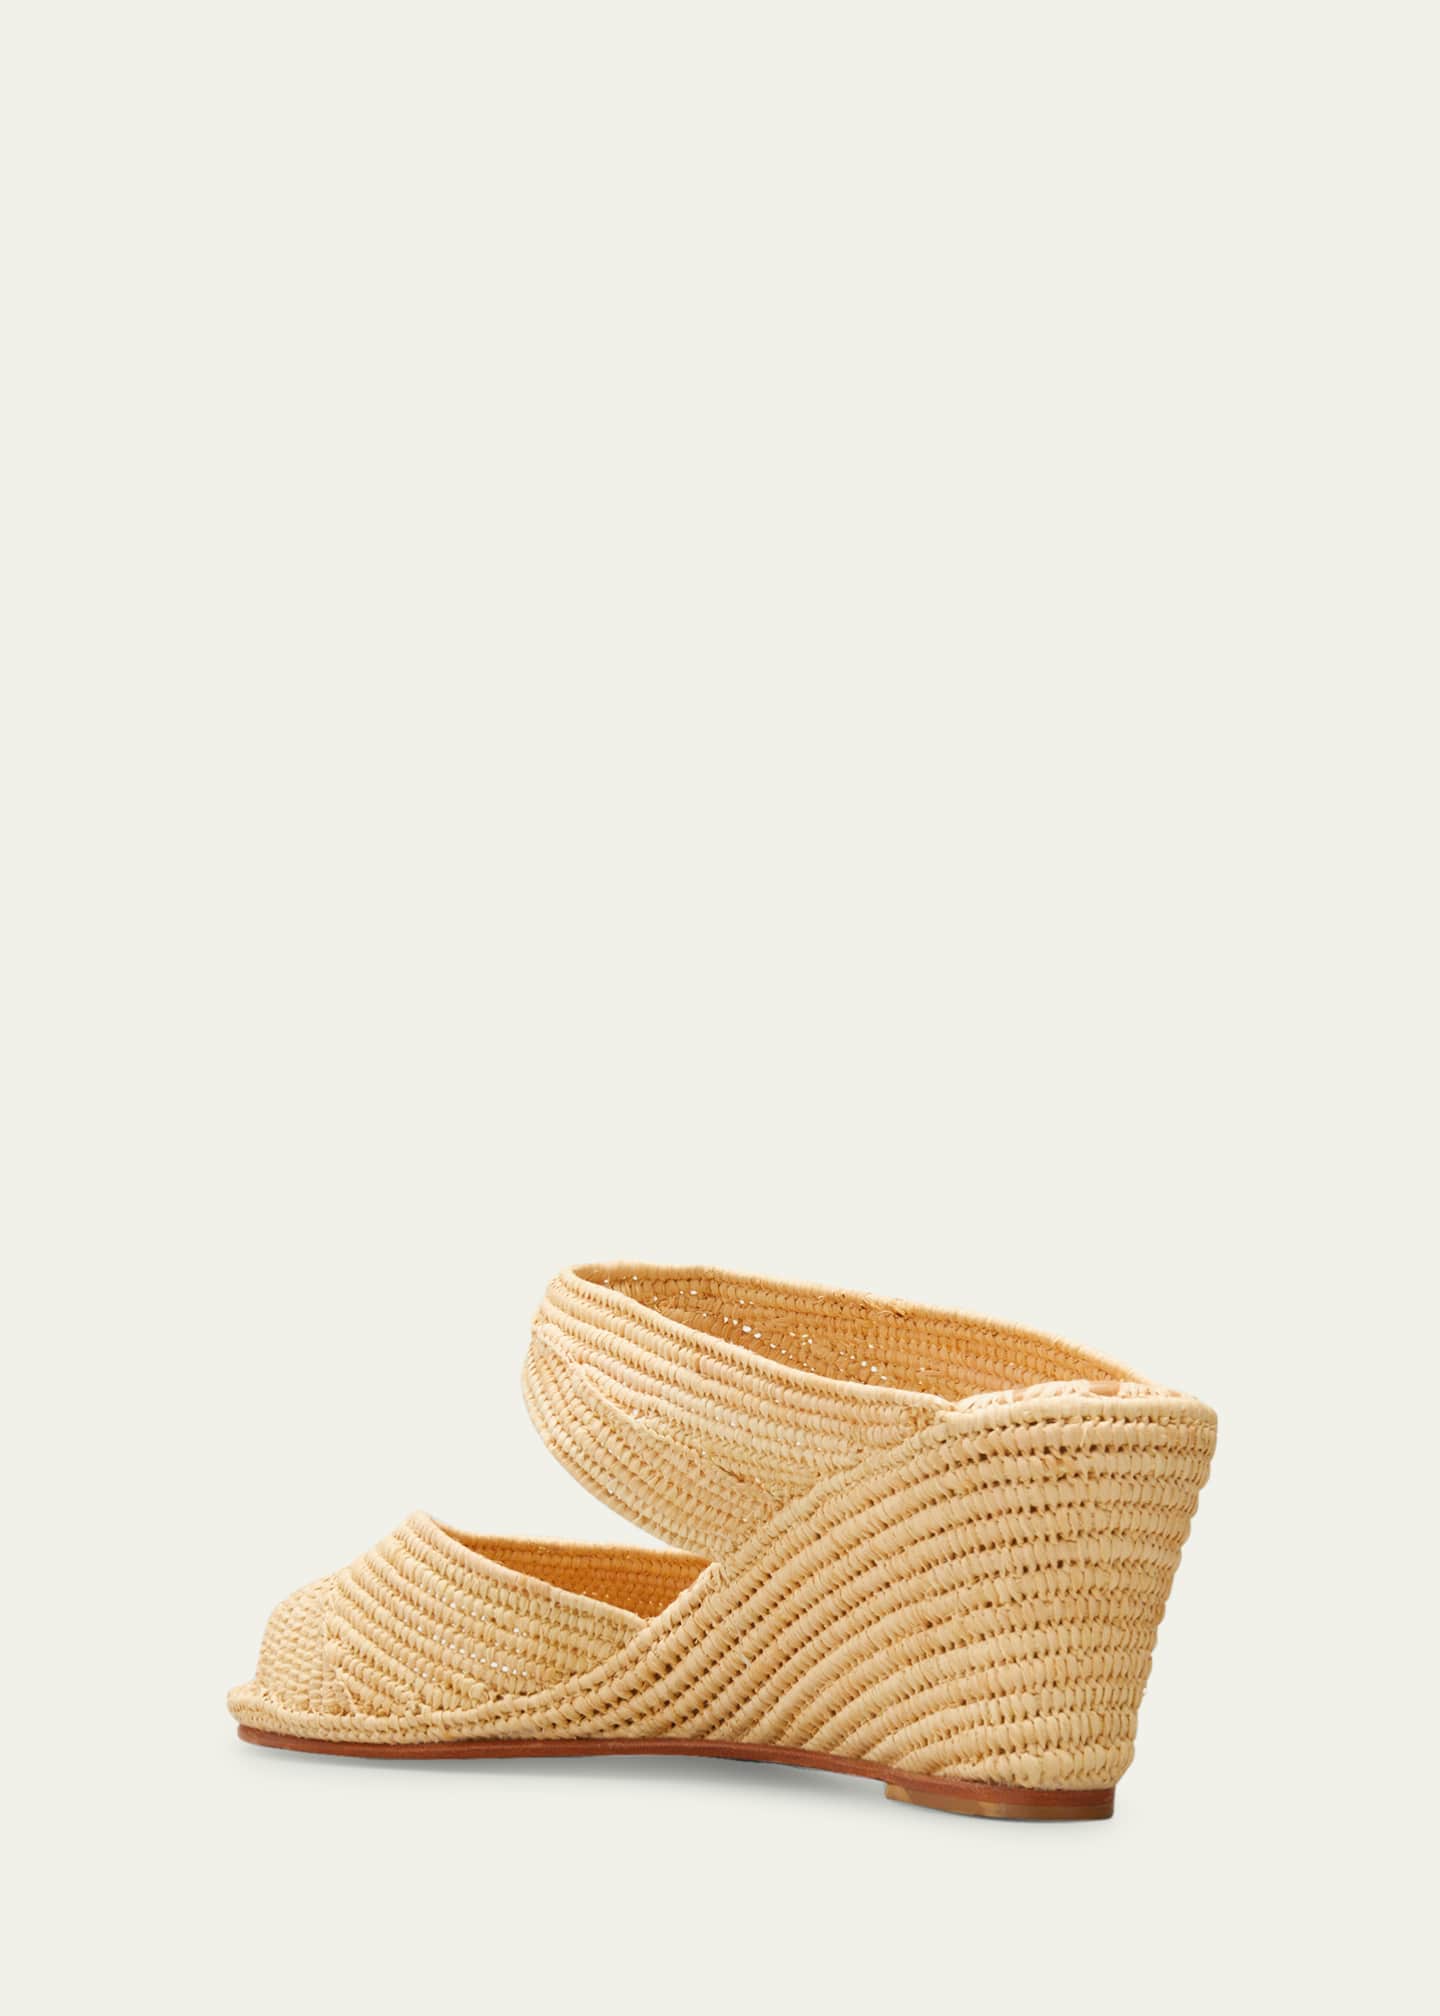 Carrie Forbes Houcine Raffia Wedge Sandals Image 4 of 5